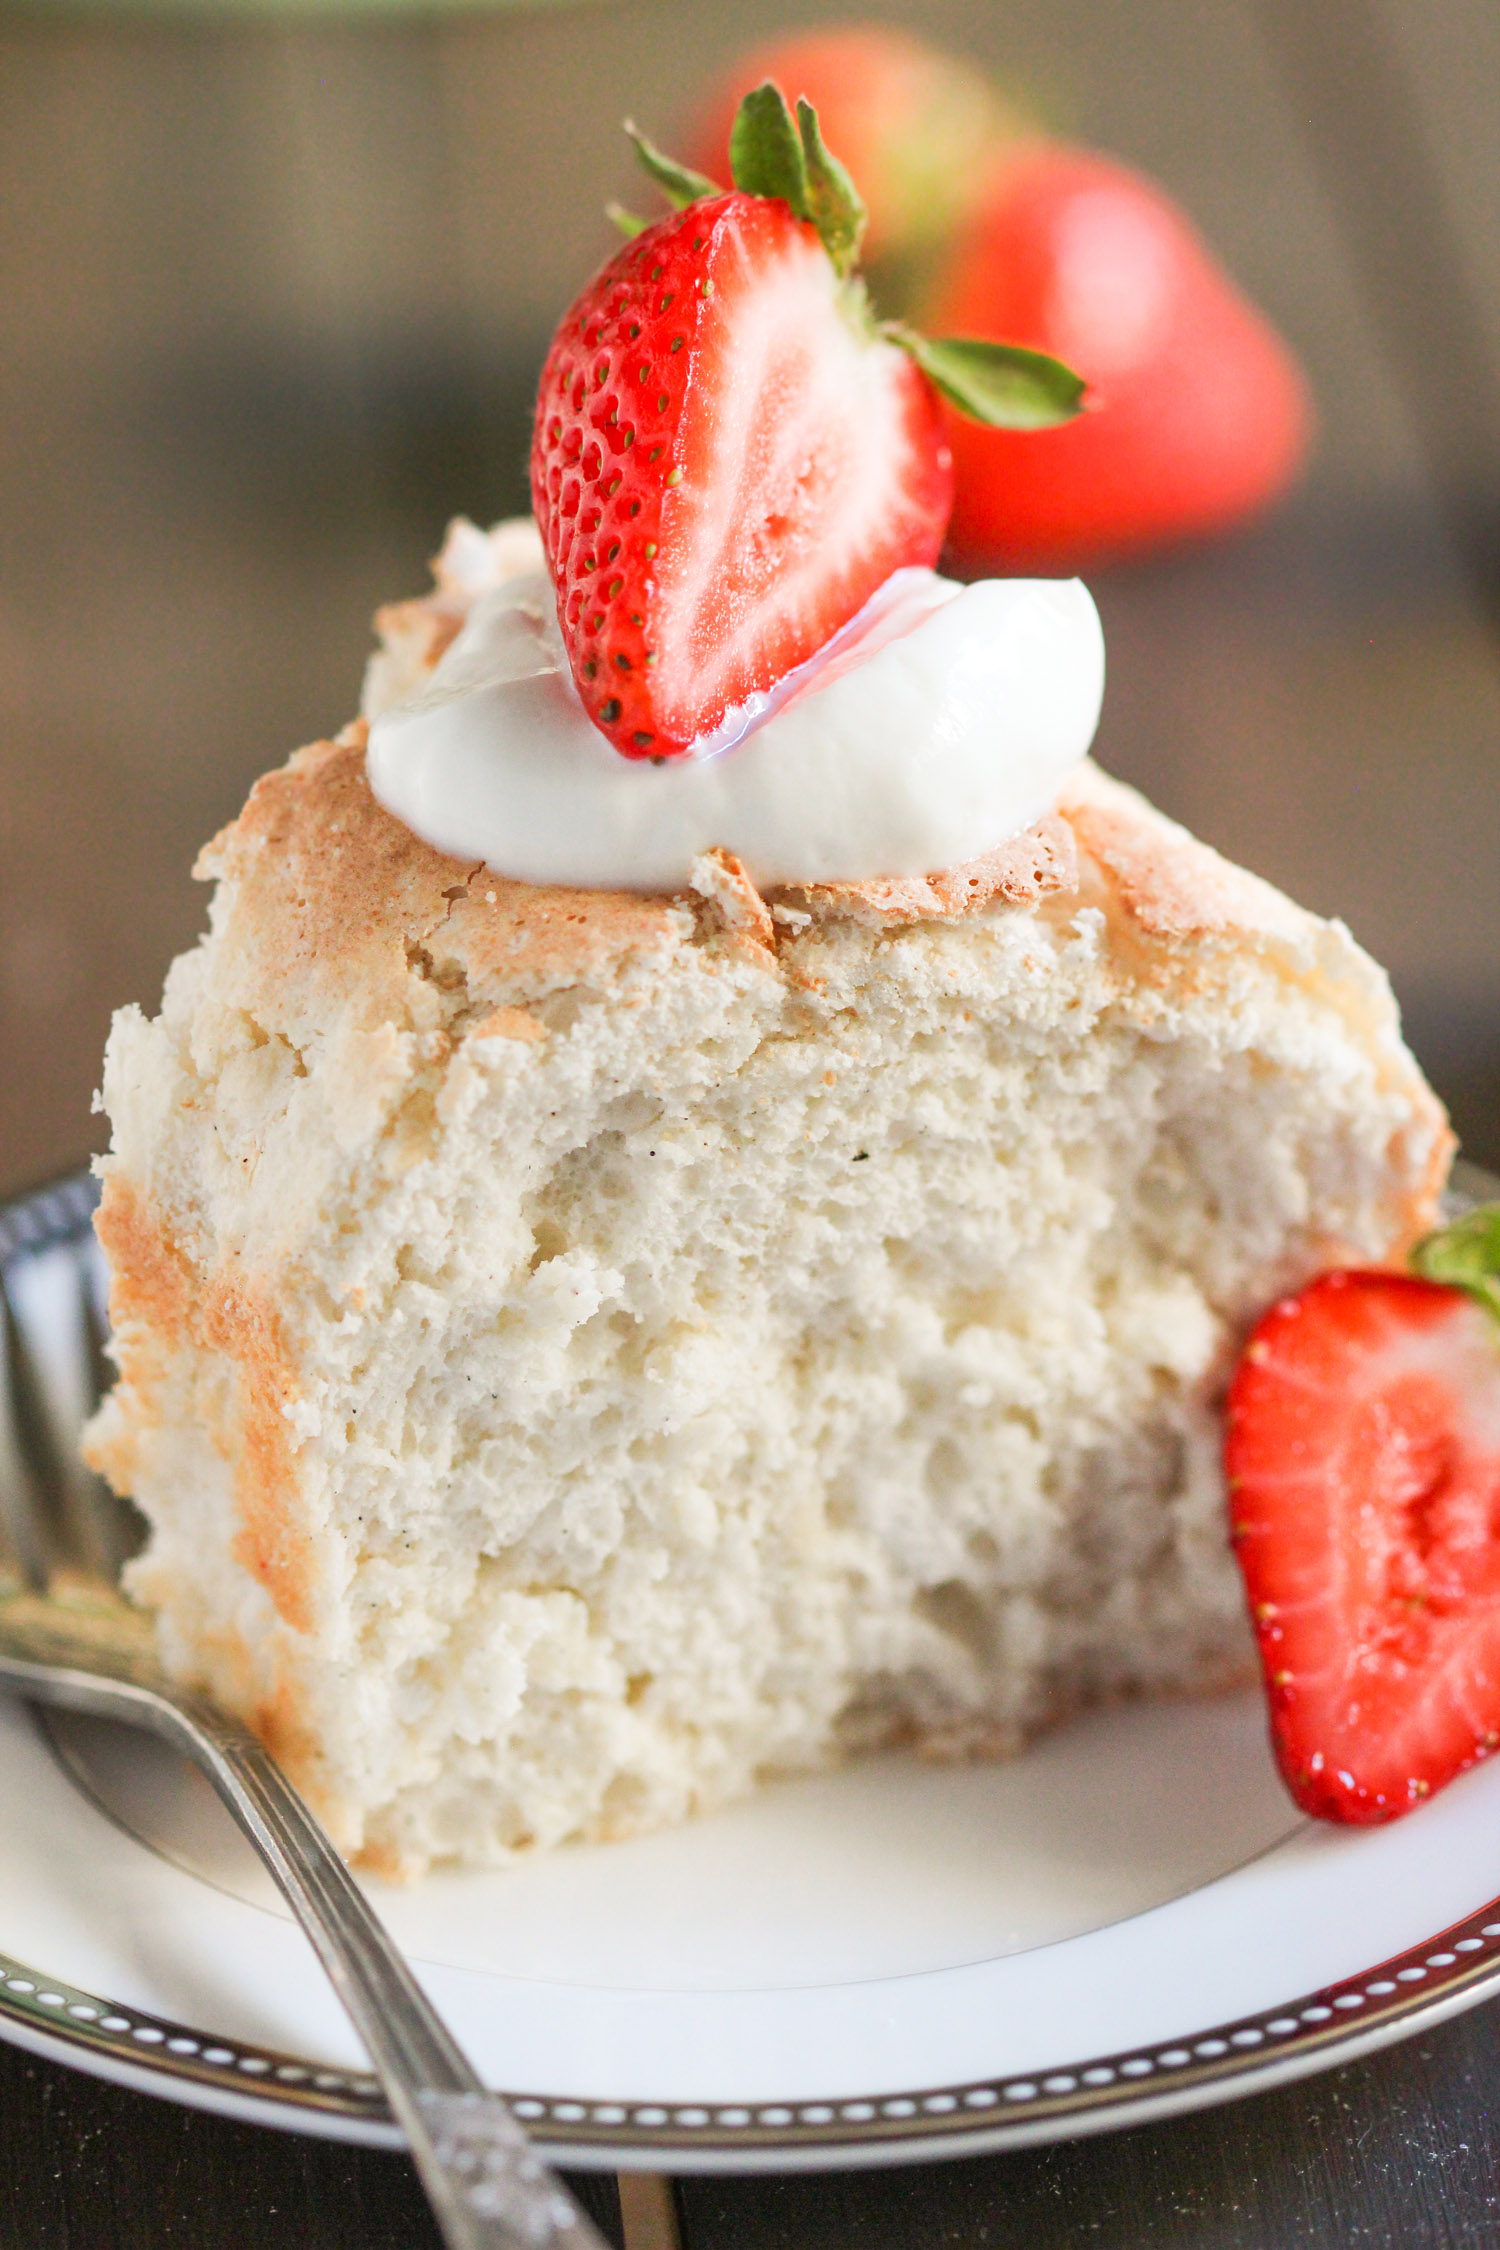 Healthy Angel Food Cake Recipe | Only 95 calories, sugar free, gluten free